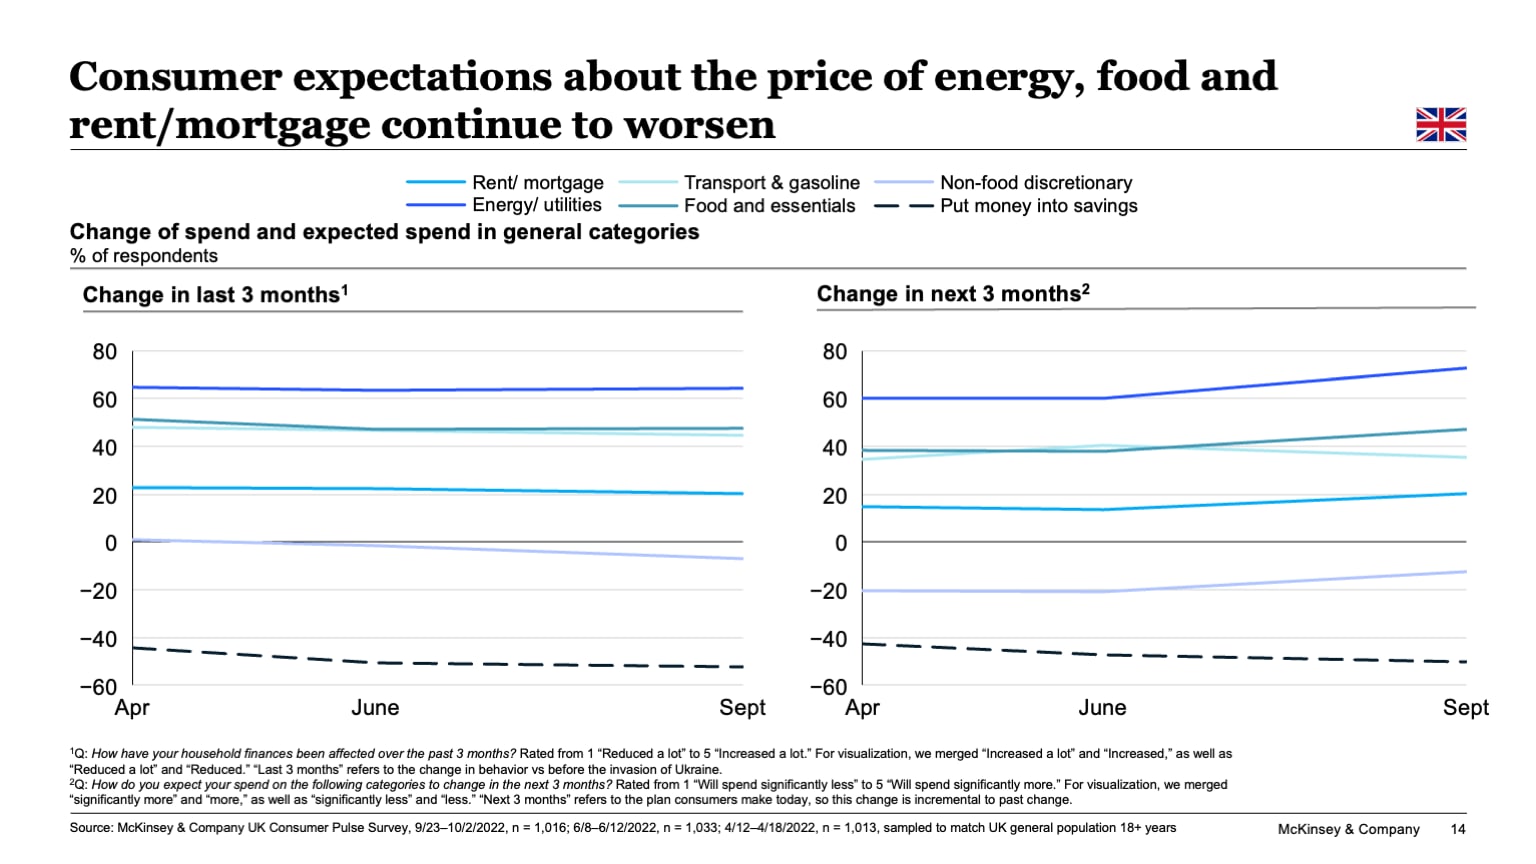 Consumer expectations about the price of energy, food and rent/mortgage continue to worsen